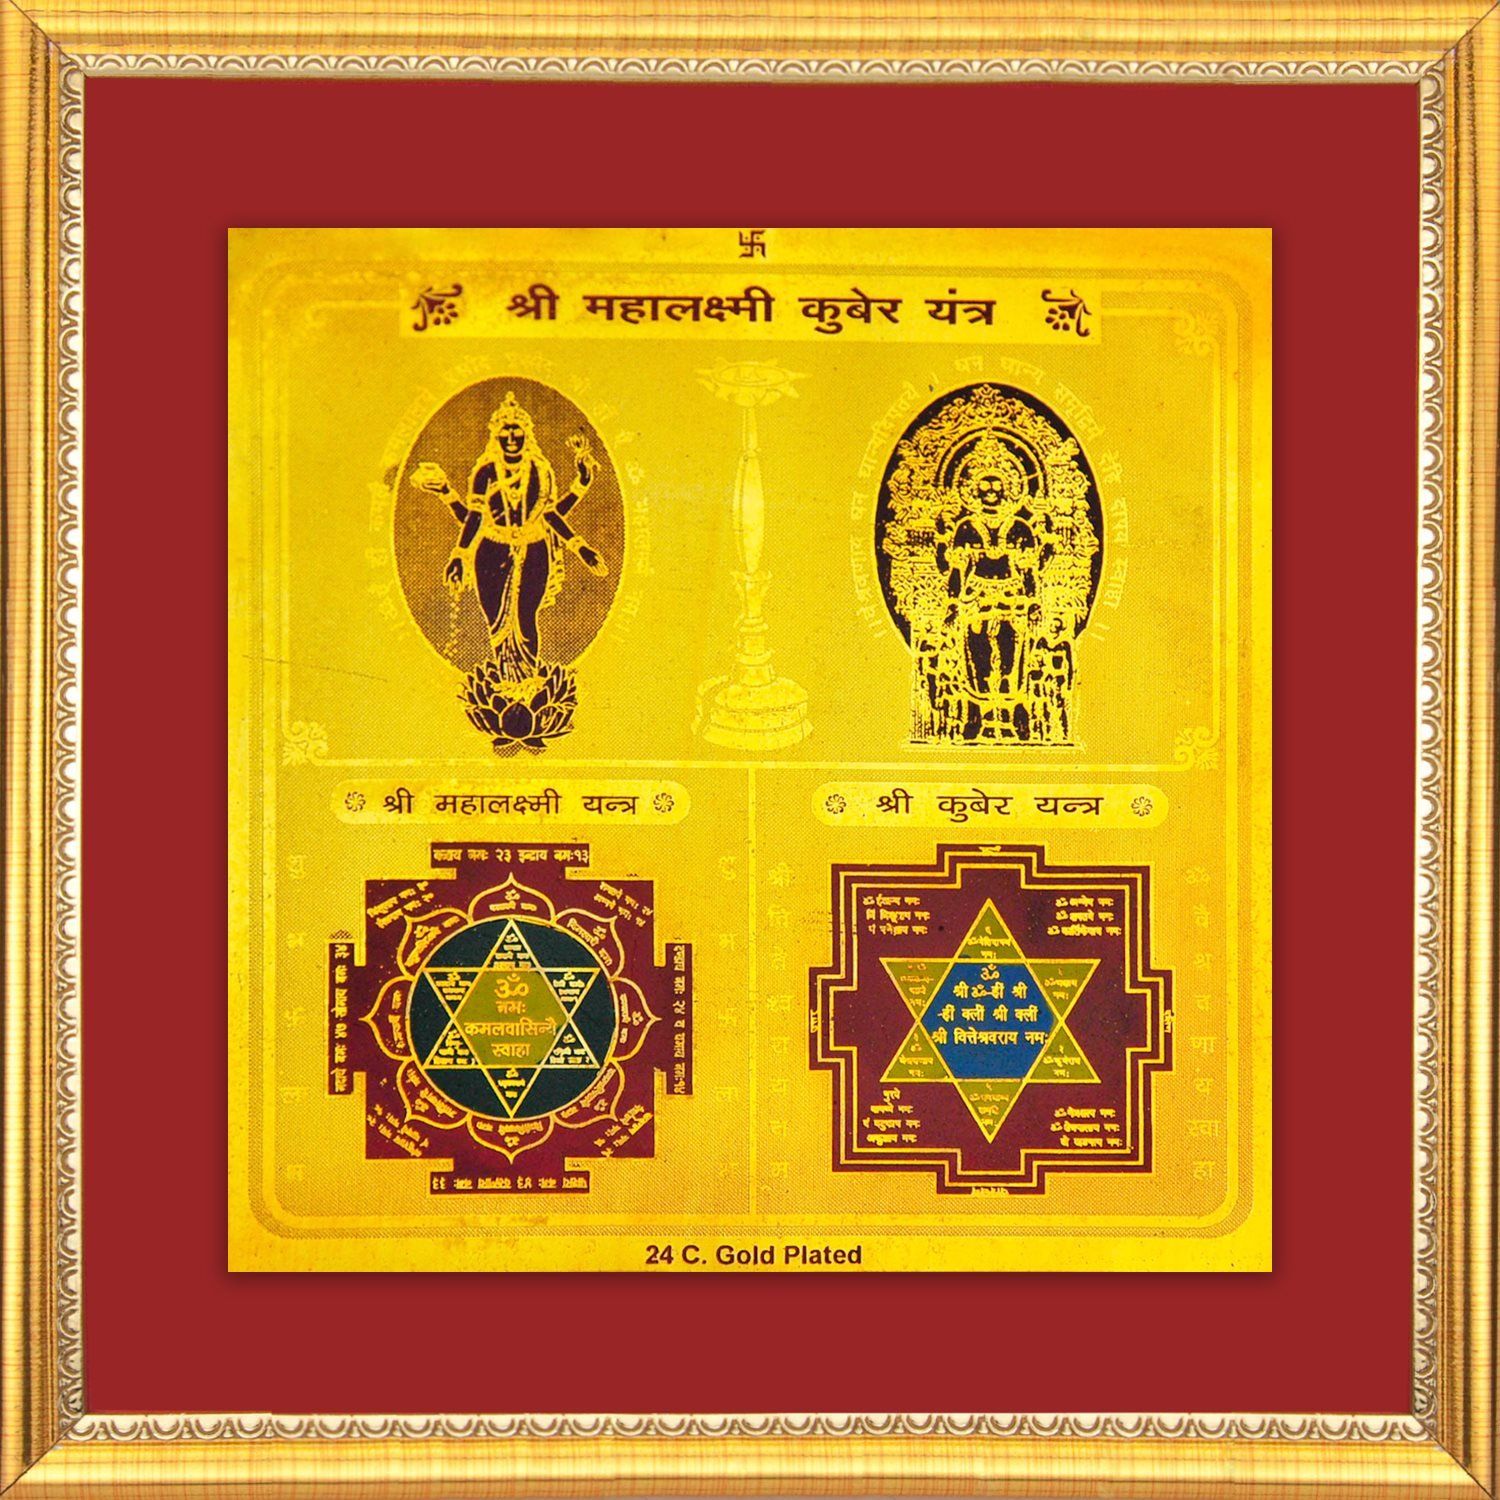 Buy Shri Maha Laxmi Kuber Yantra 7x7 with Frame Online at Low Prices in India